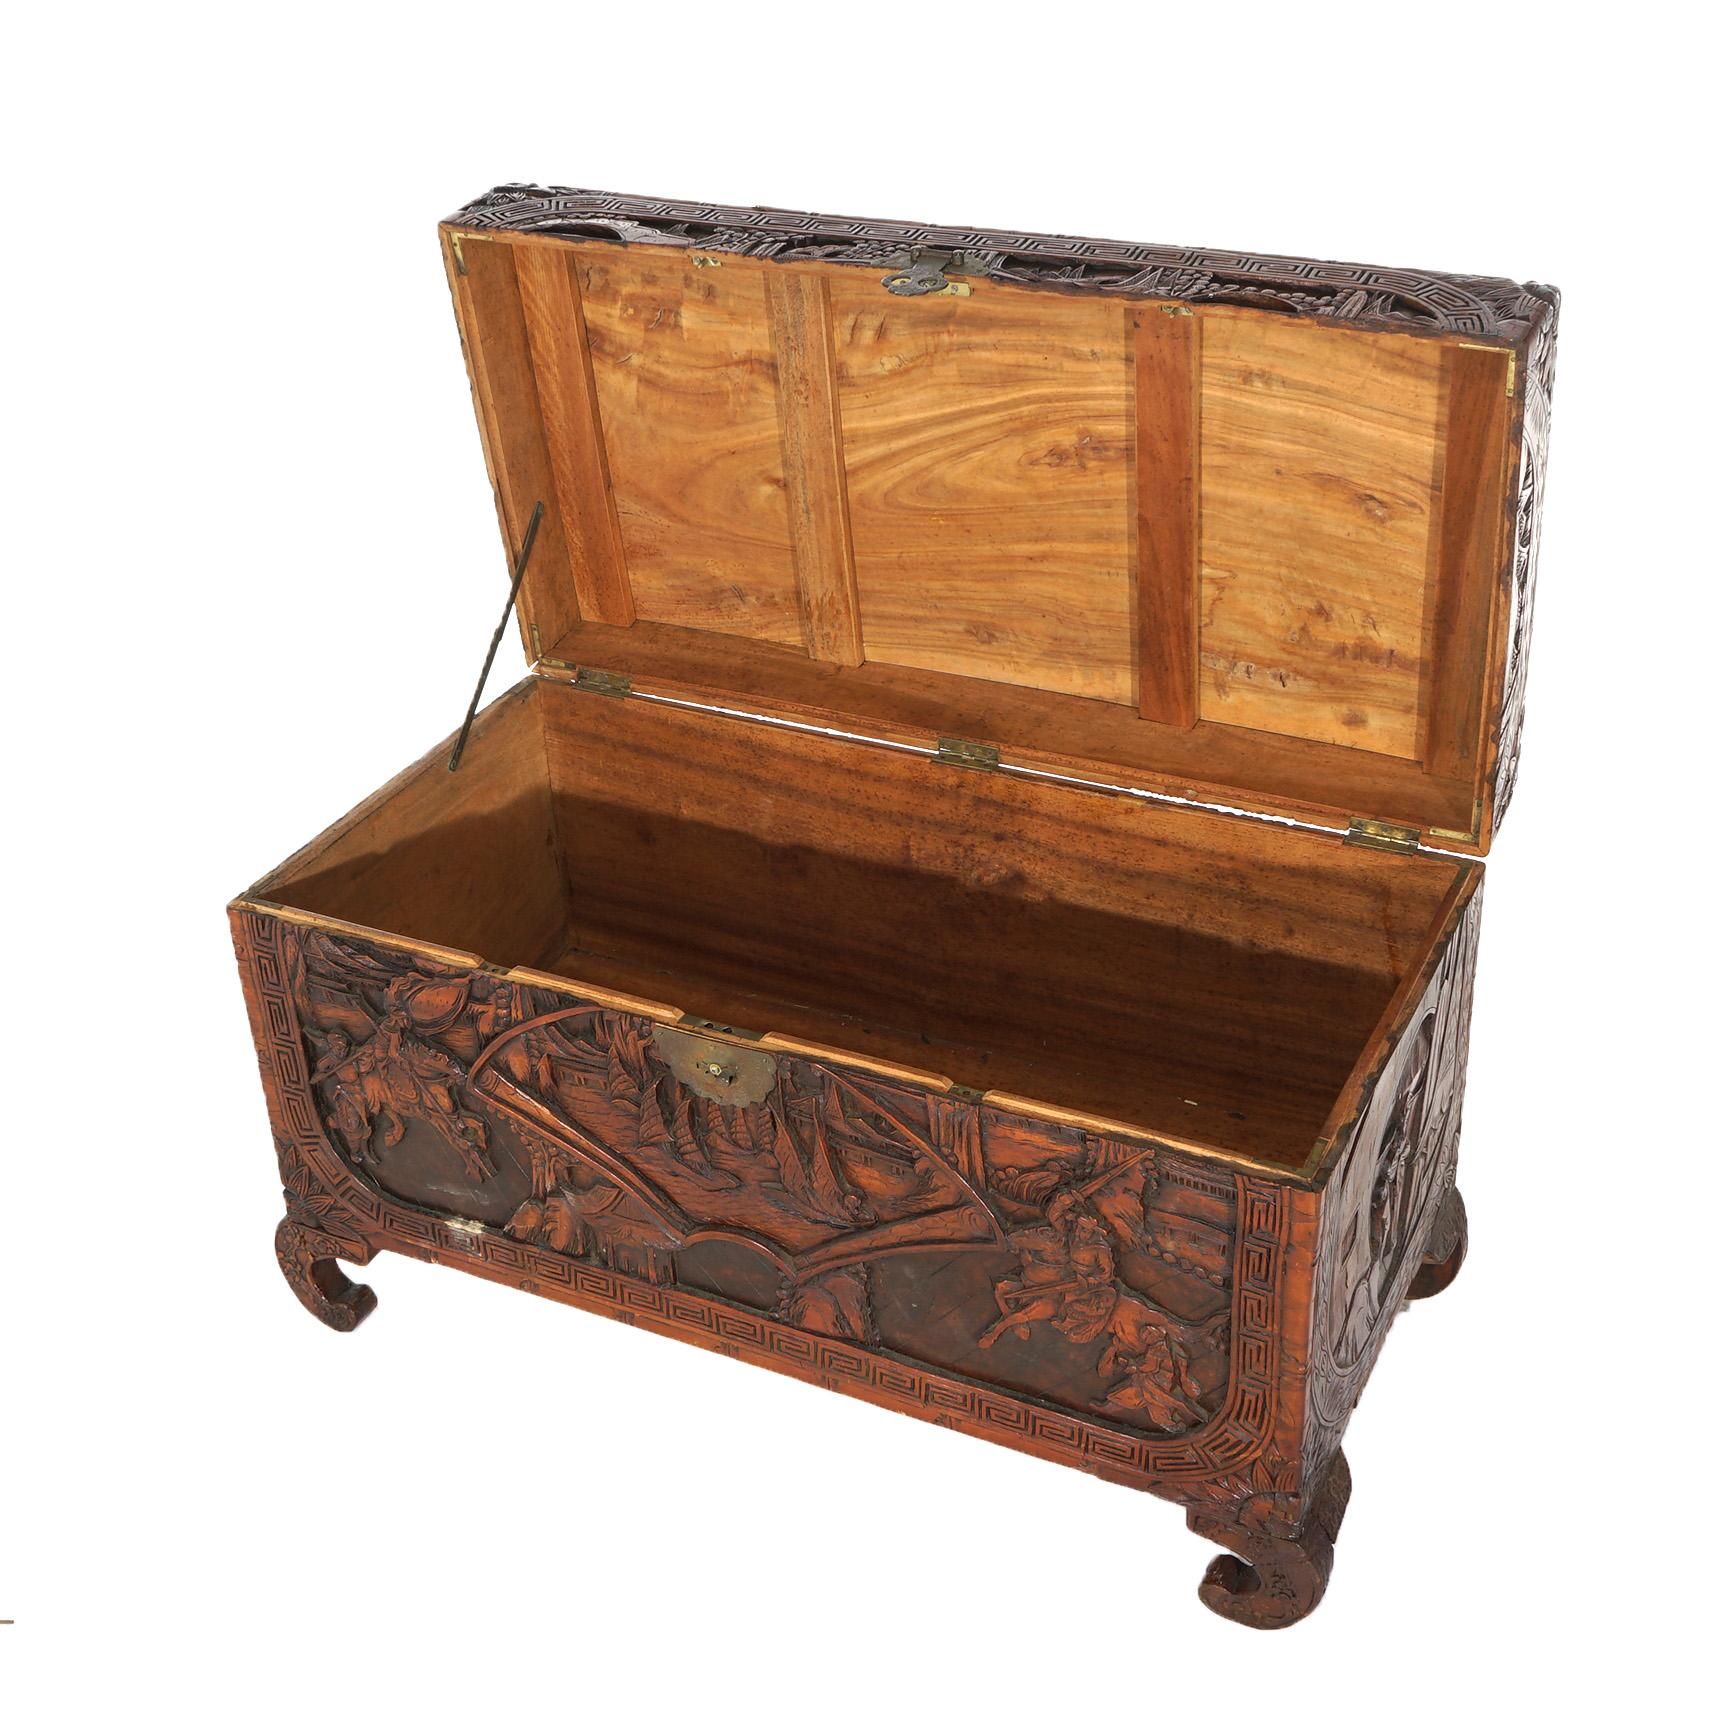 Antique Chinese Carved Hardwood Chest with Figures & Scenes in Relief C1920 For Sale 6